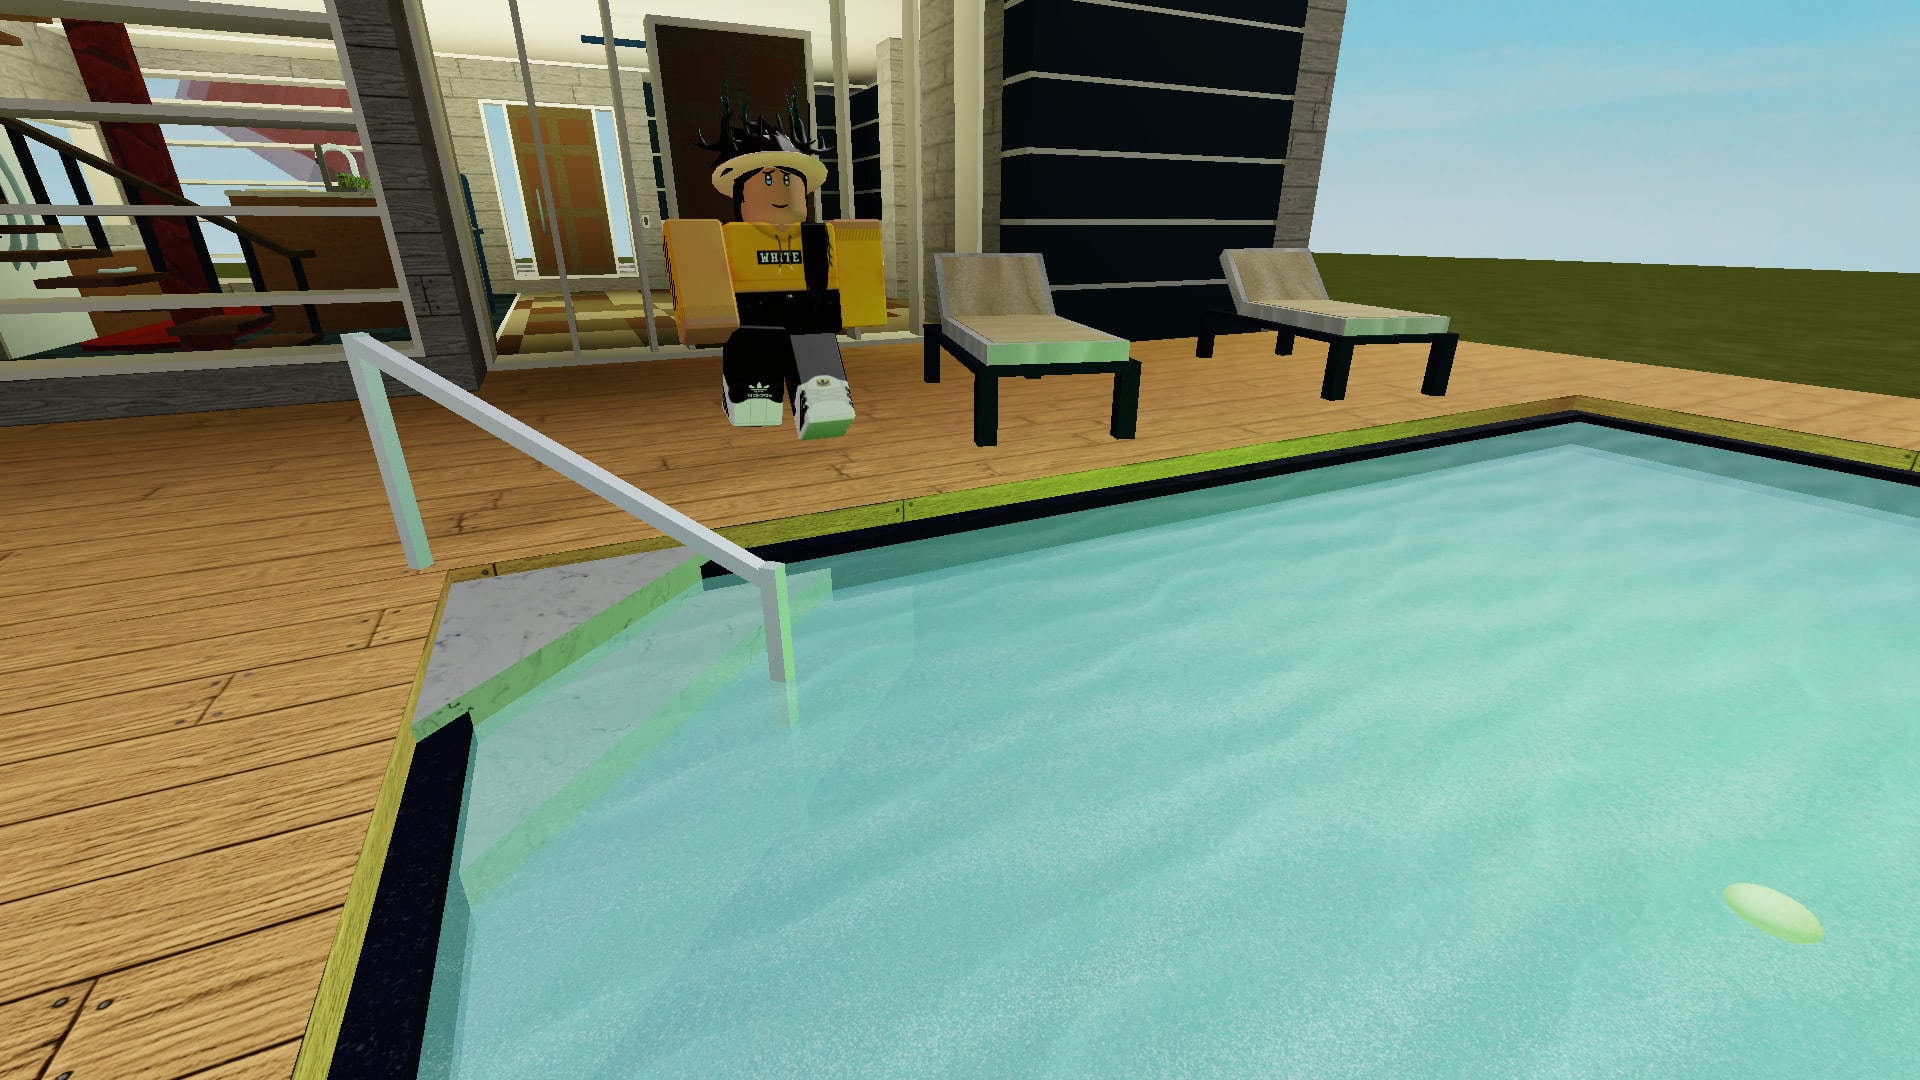 Build A Medium Home In Roblox Bloxbrg For Under 75k By Aestheticbuildx